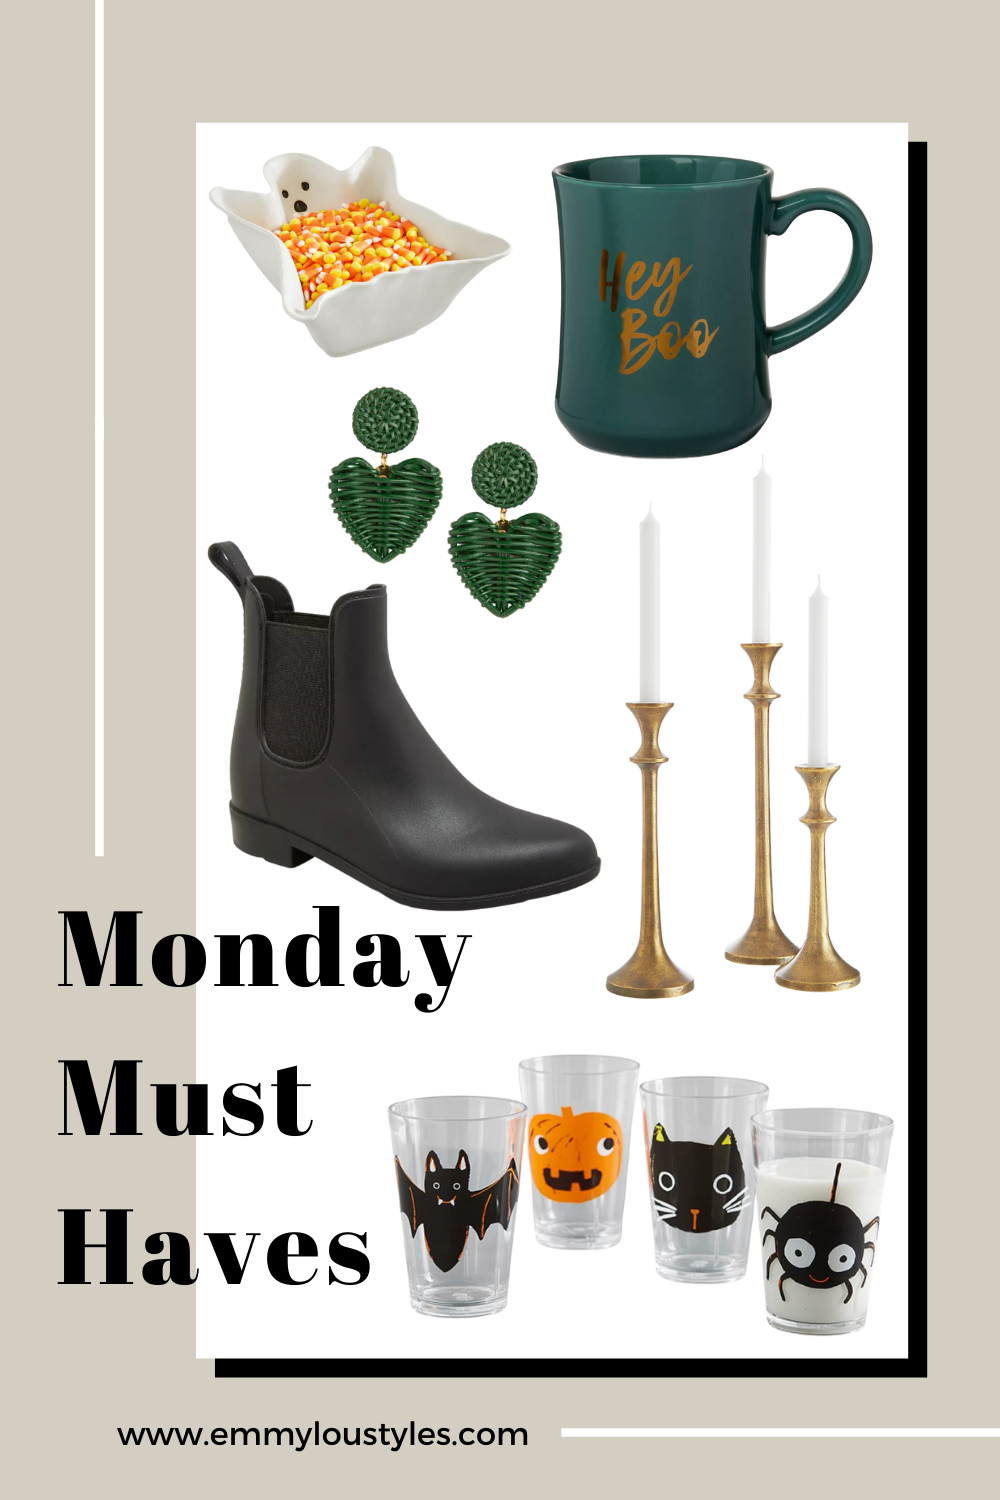 Monday Must Haves by Emmy Lou Styles